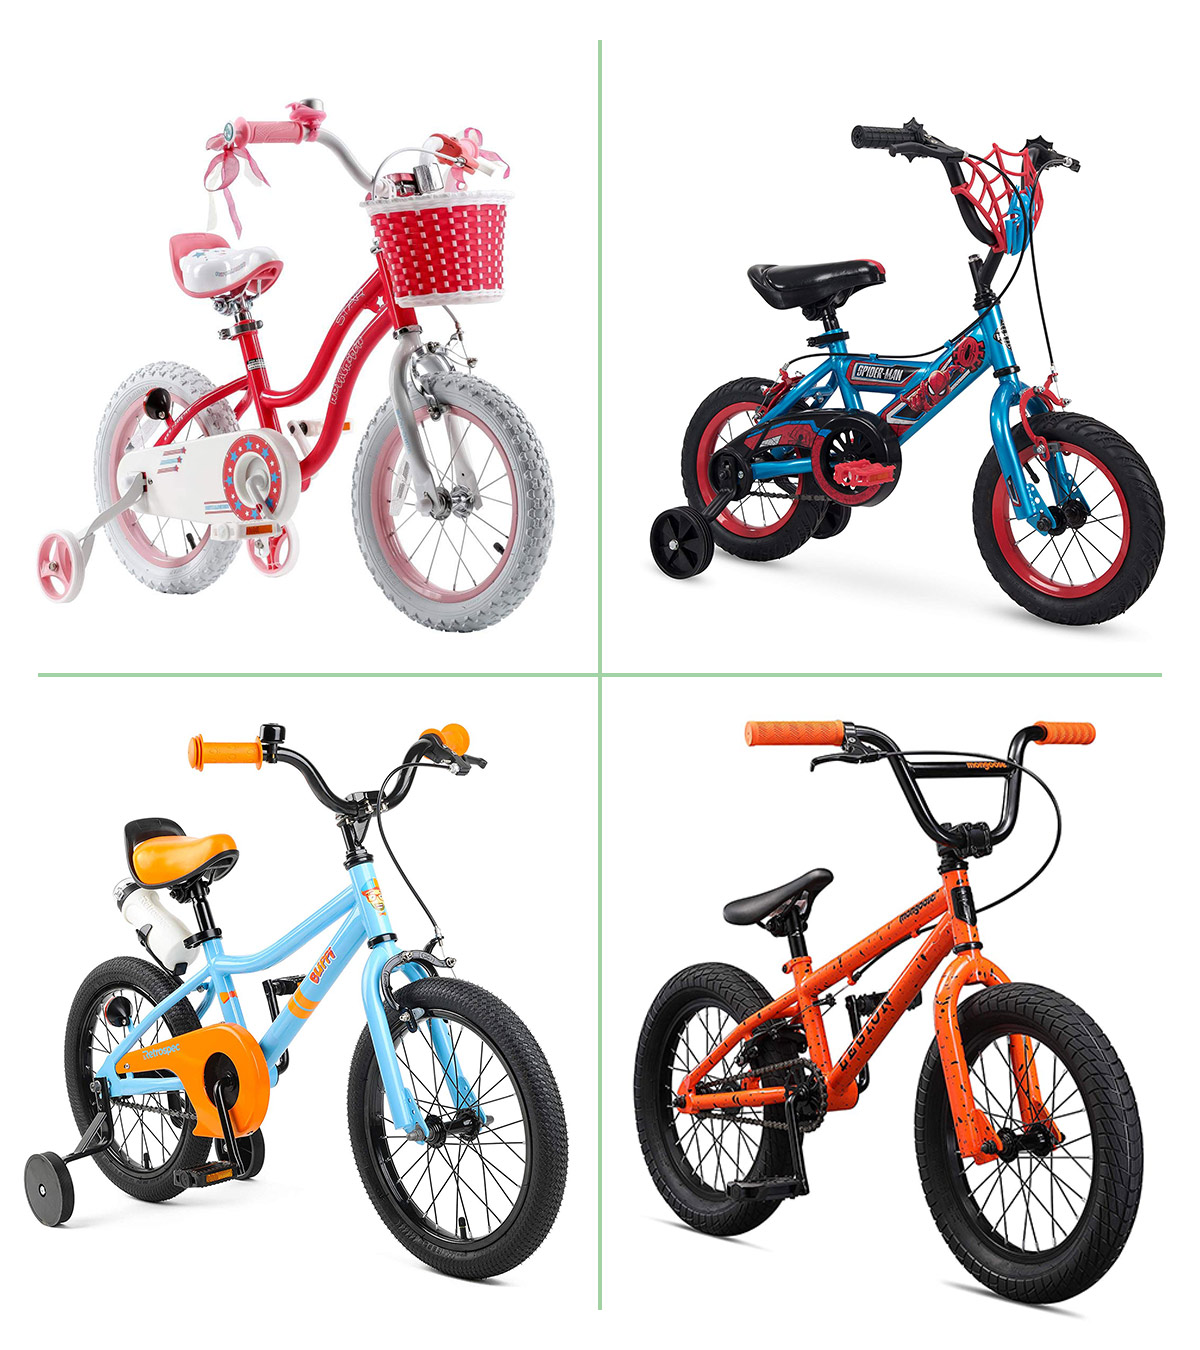 15 Best Bikes For Kids to buy In 2022 : Reviews